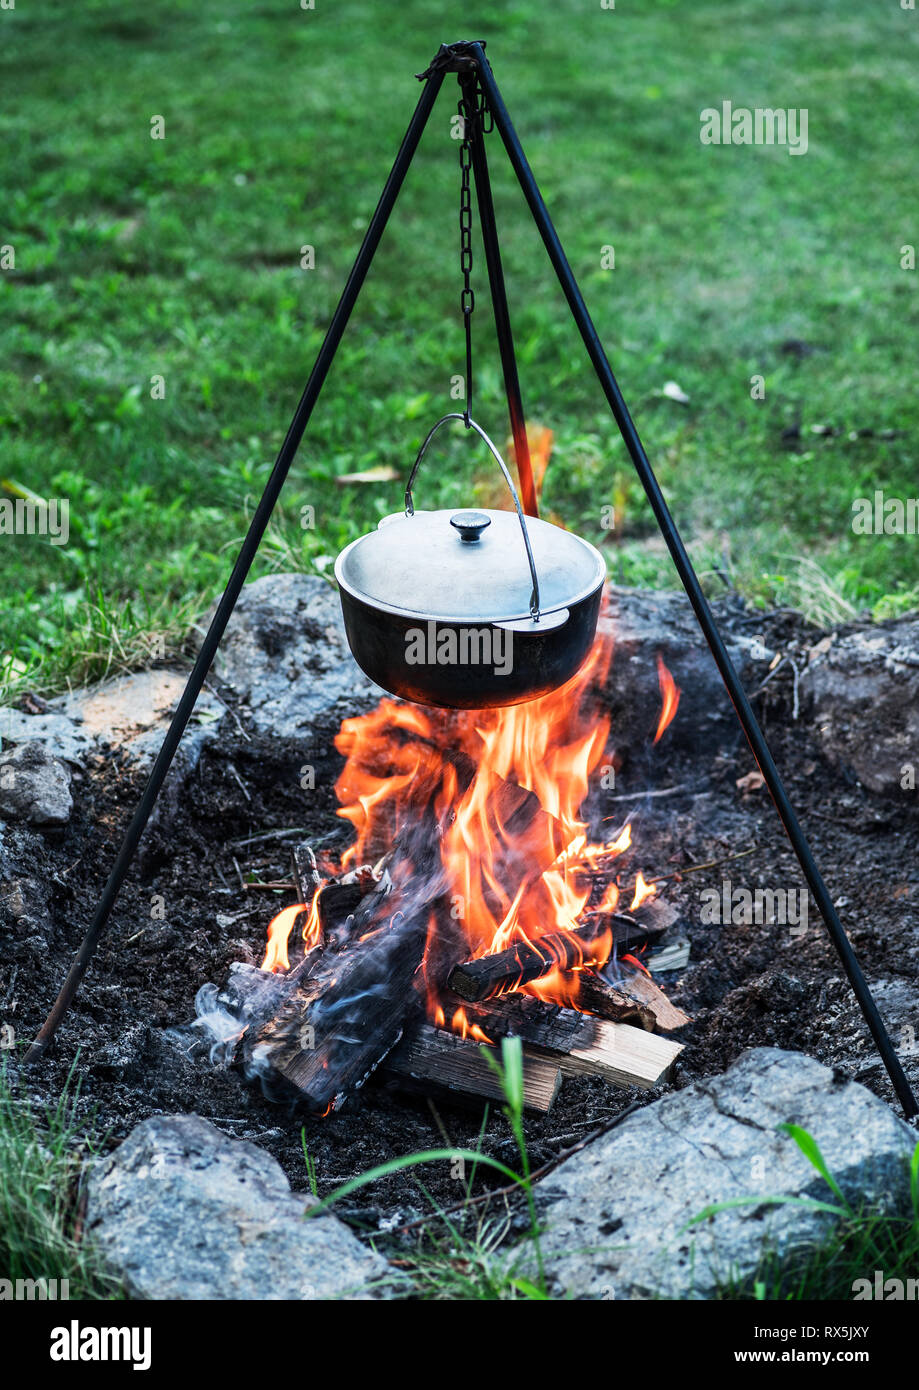 Cauldron over the fire. Preparing food on the campfire. Stock Photo